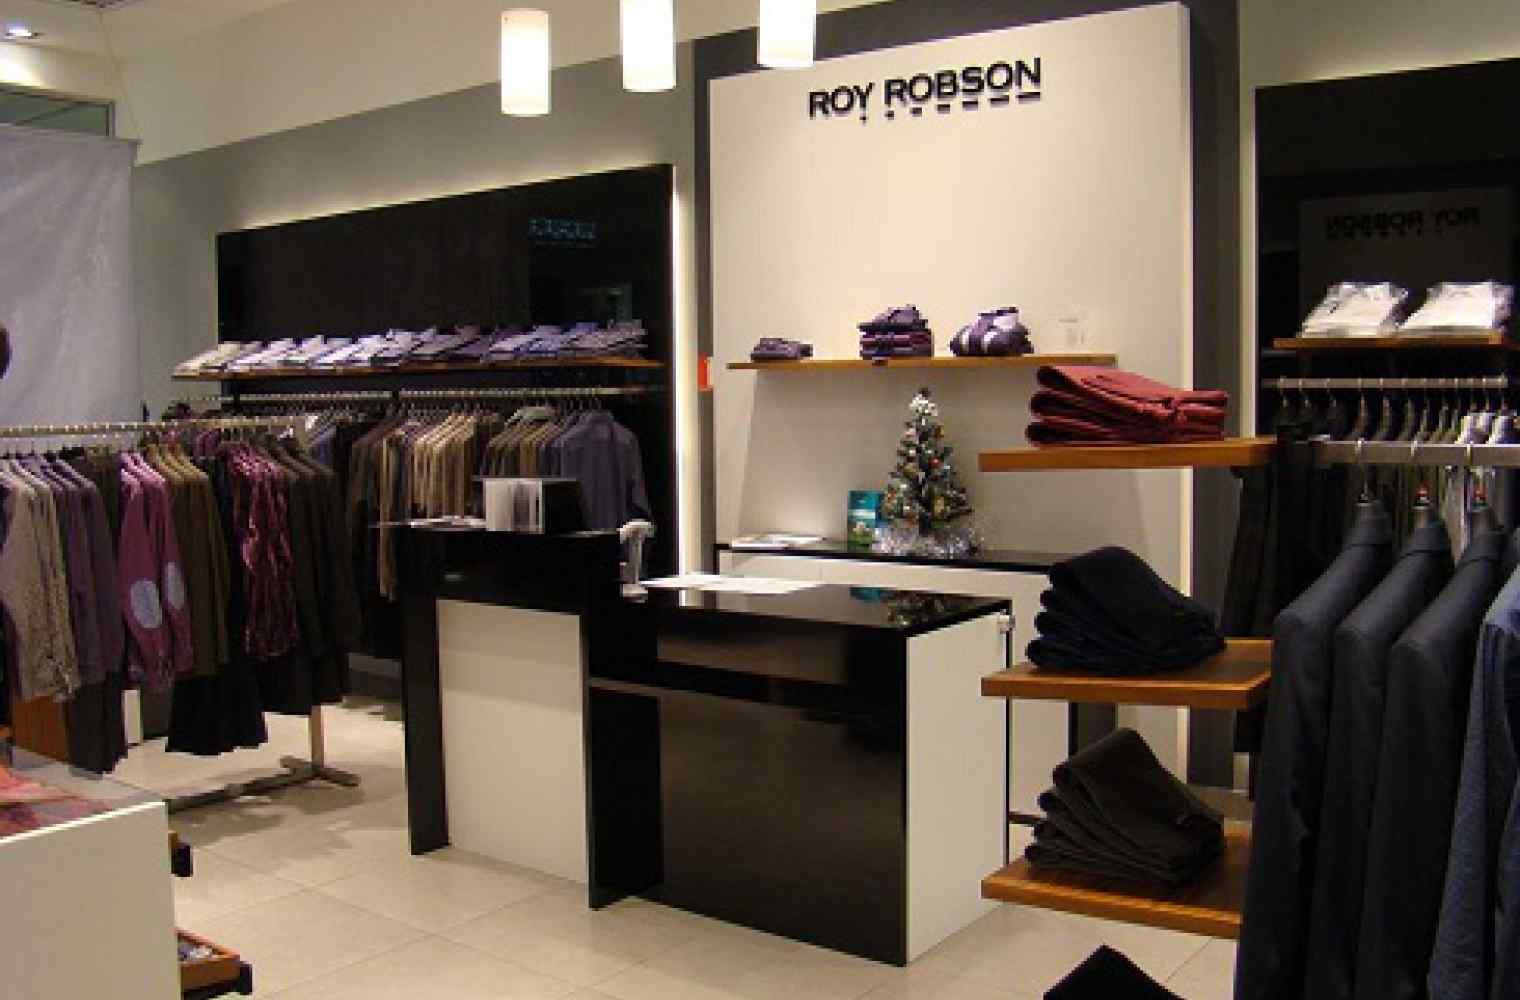 European men’s wear shop Roy Robson will be opened in Shopping and entertainment center Respublika